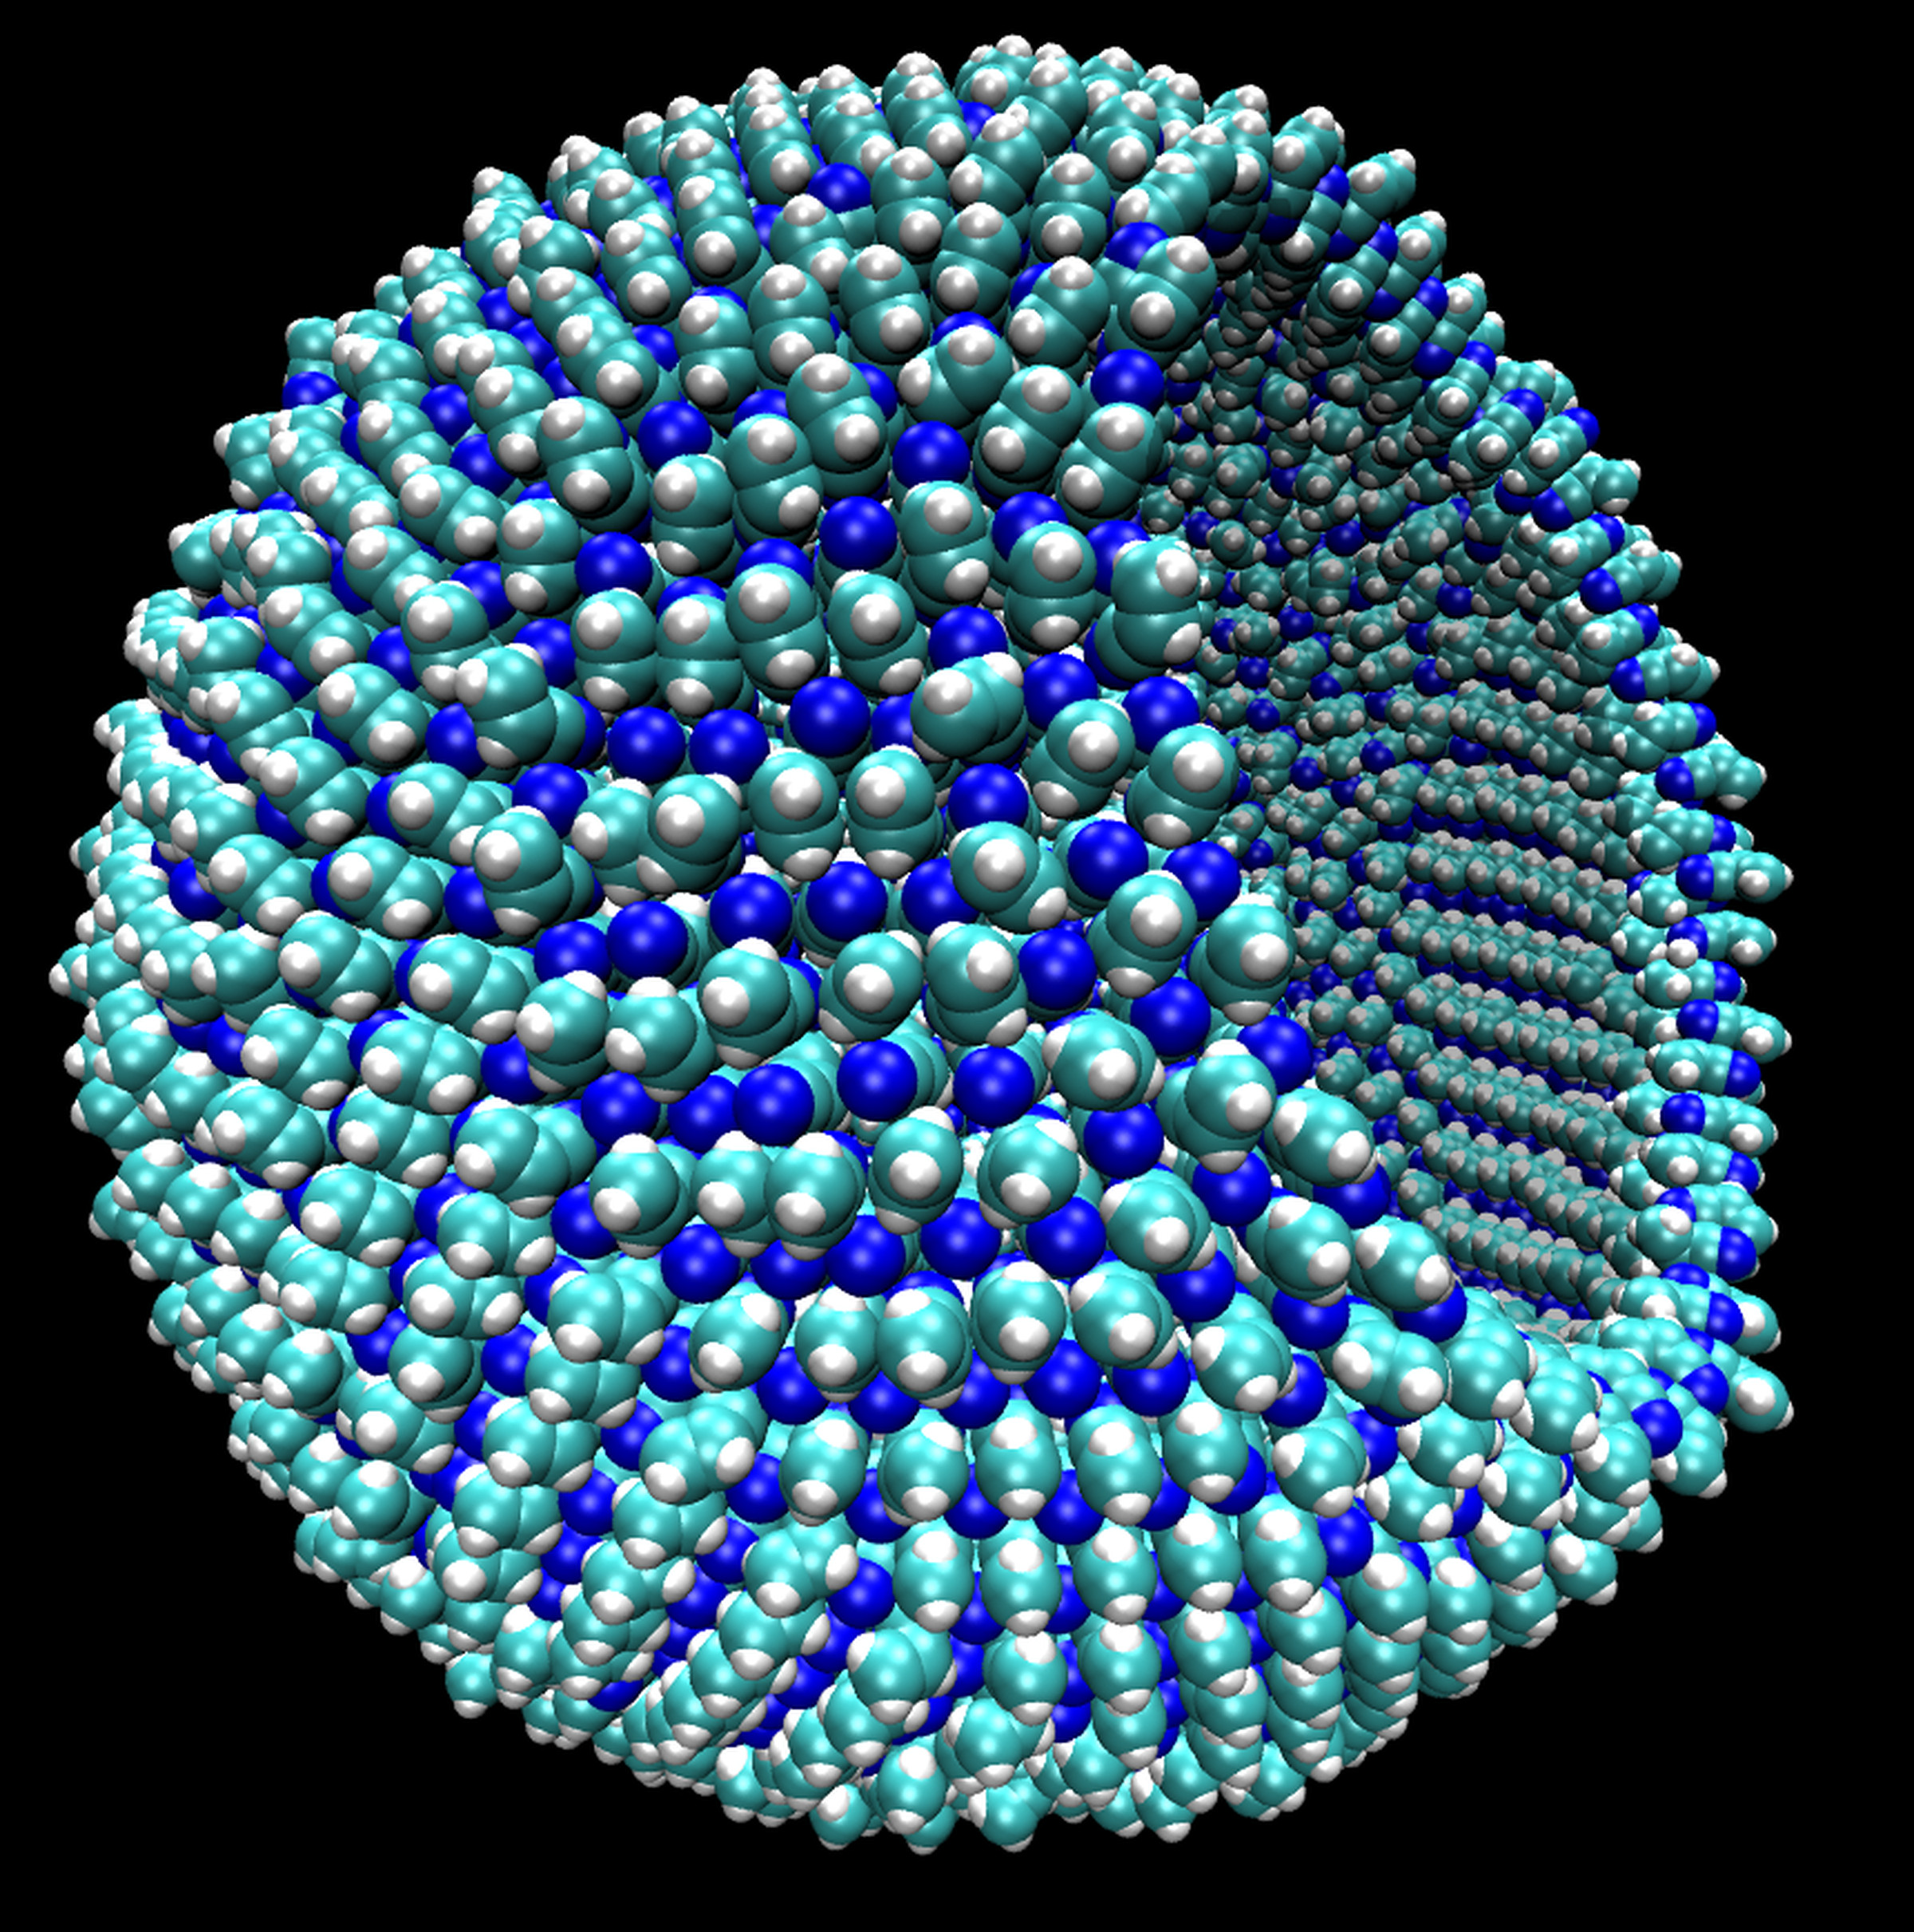 A computer model of a theoretical membrane that could exist on Titan, made of vinyl cyanide.